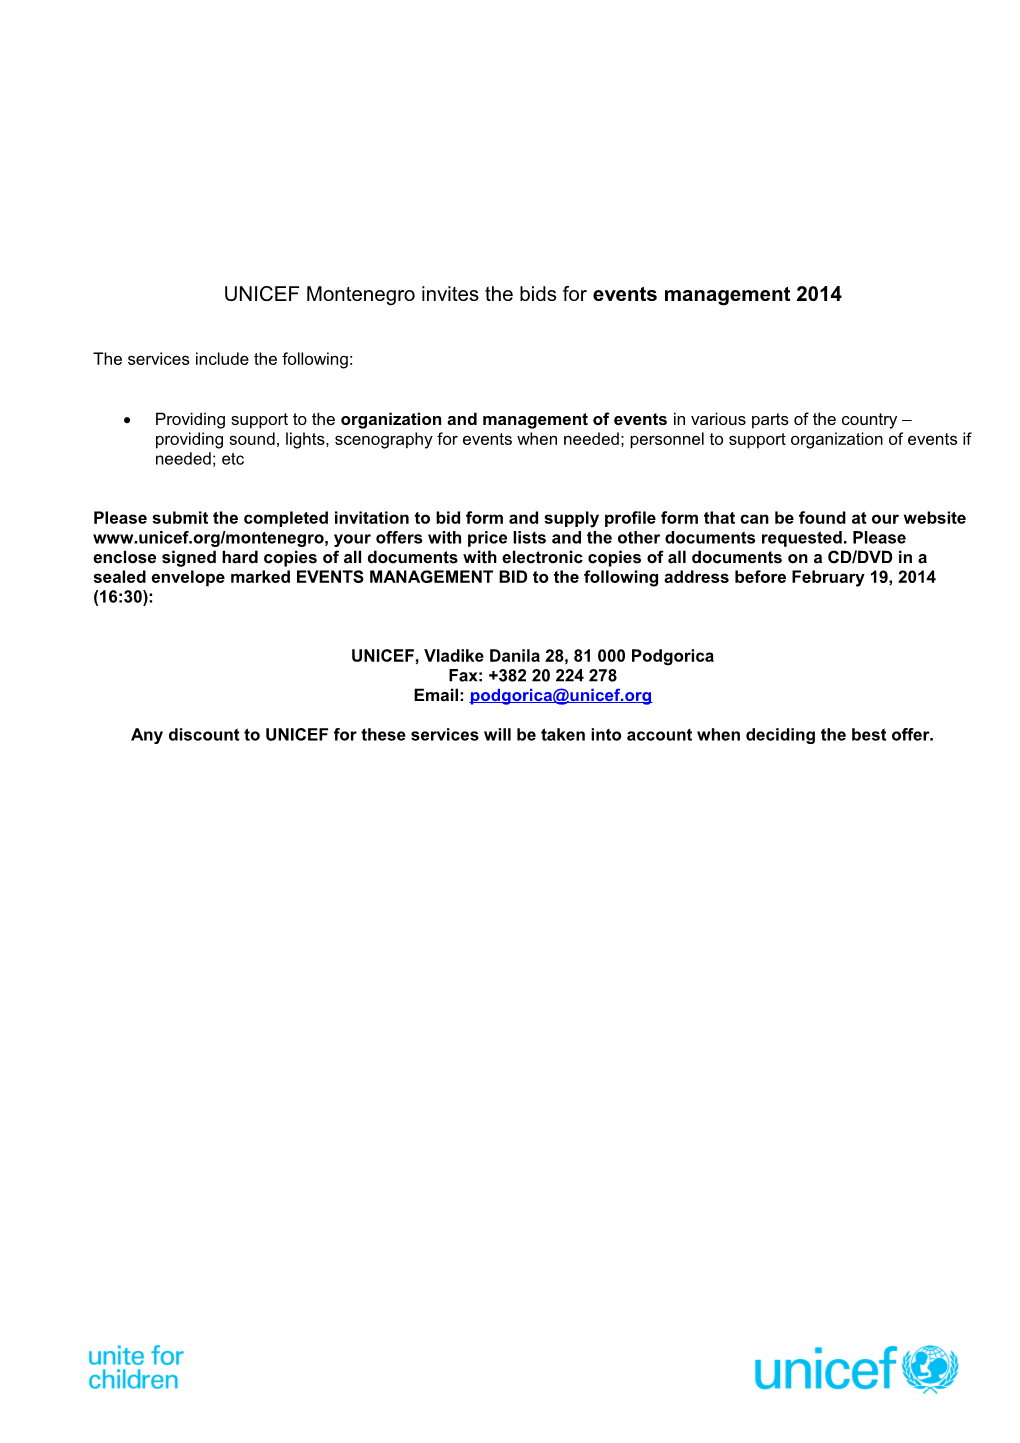 UNICEF Montenegro Invites the Bids for Events Management 2014